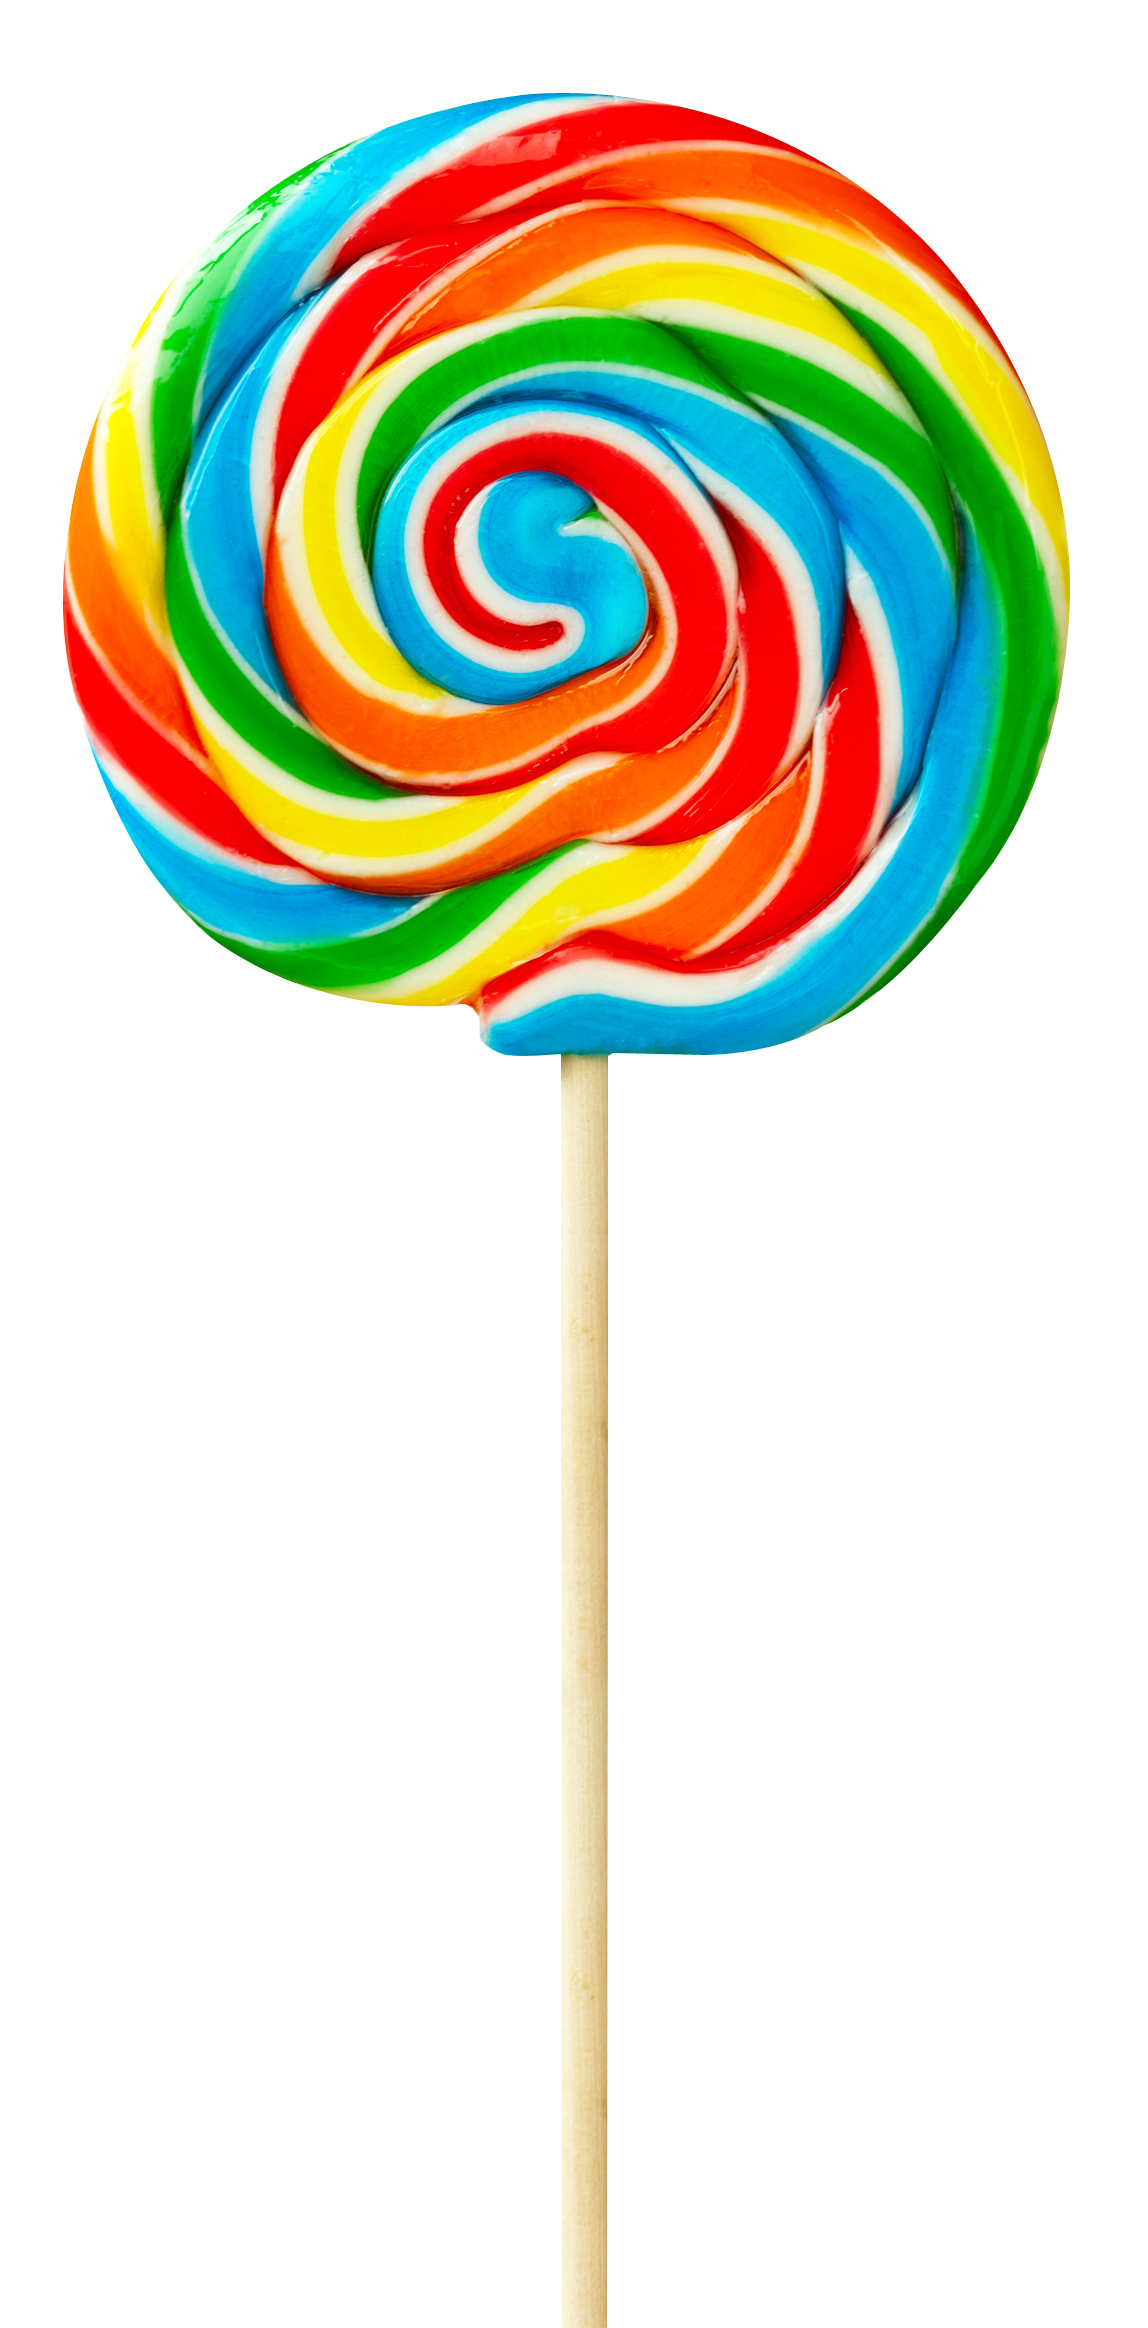 0 Result Images of Candy Shop Logo Png - PNG Image Collection